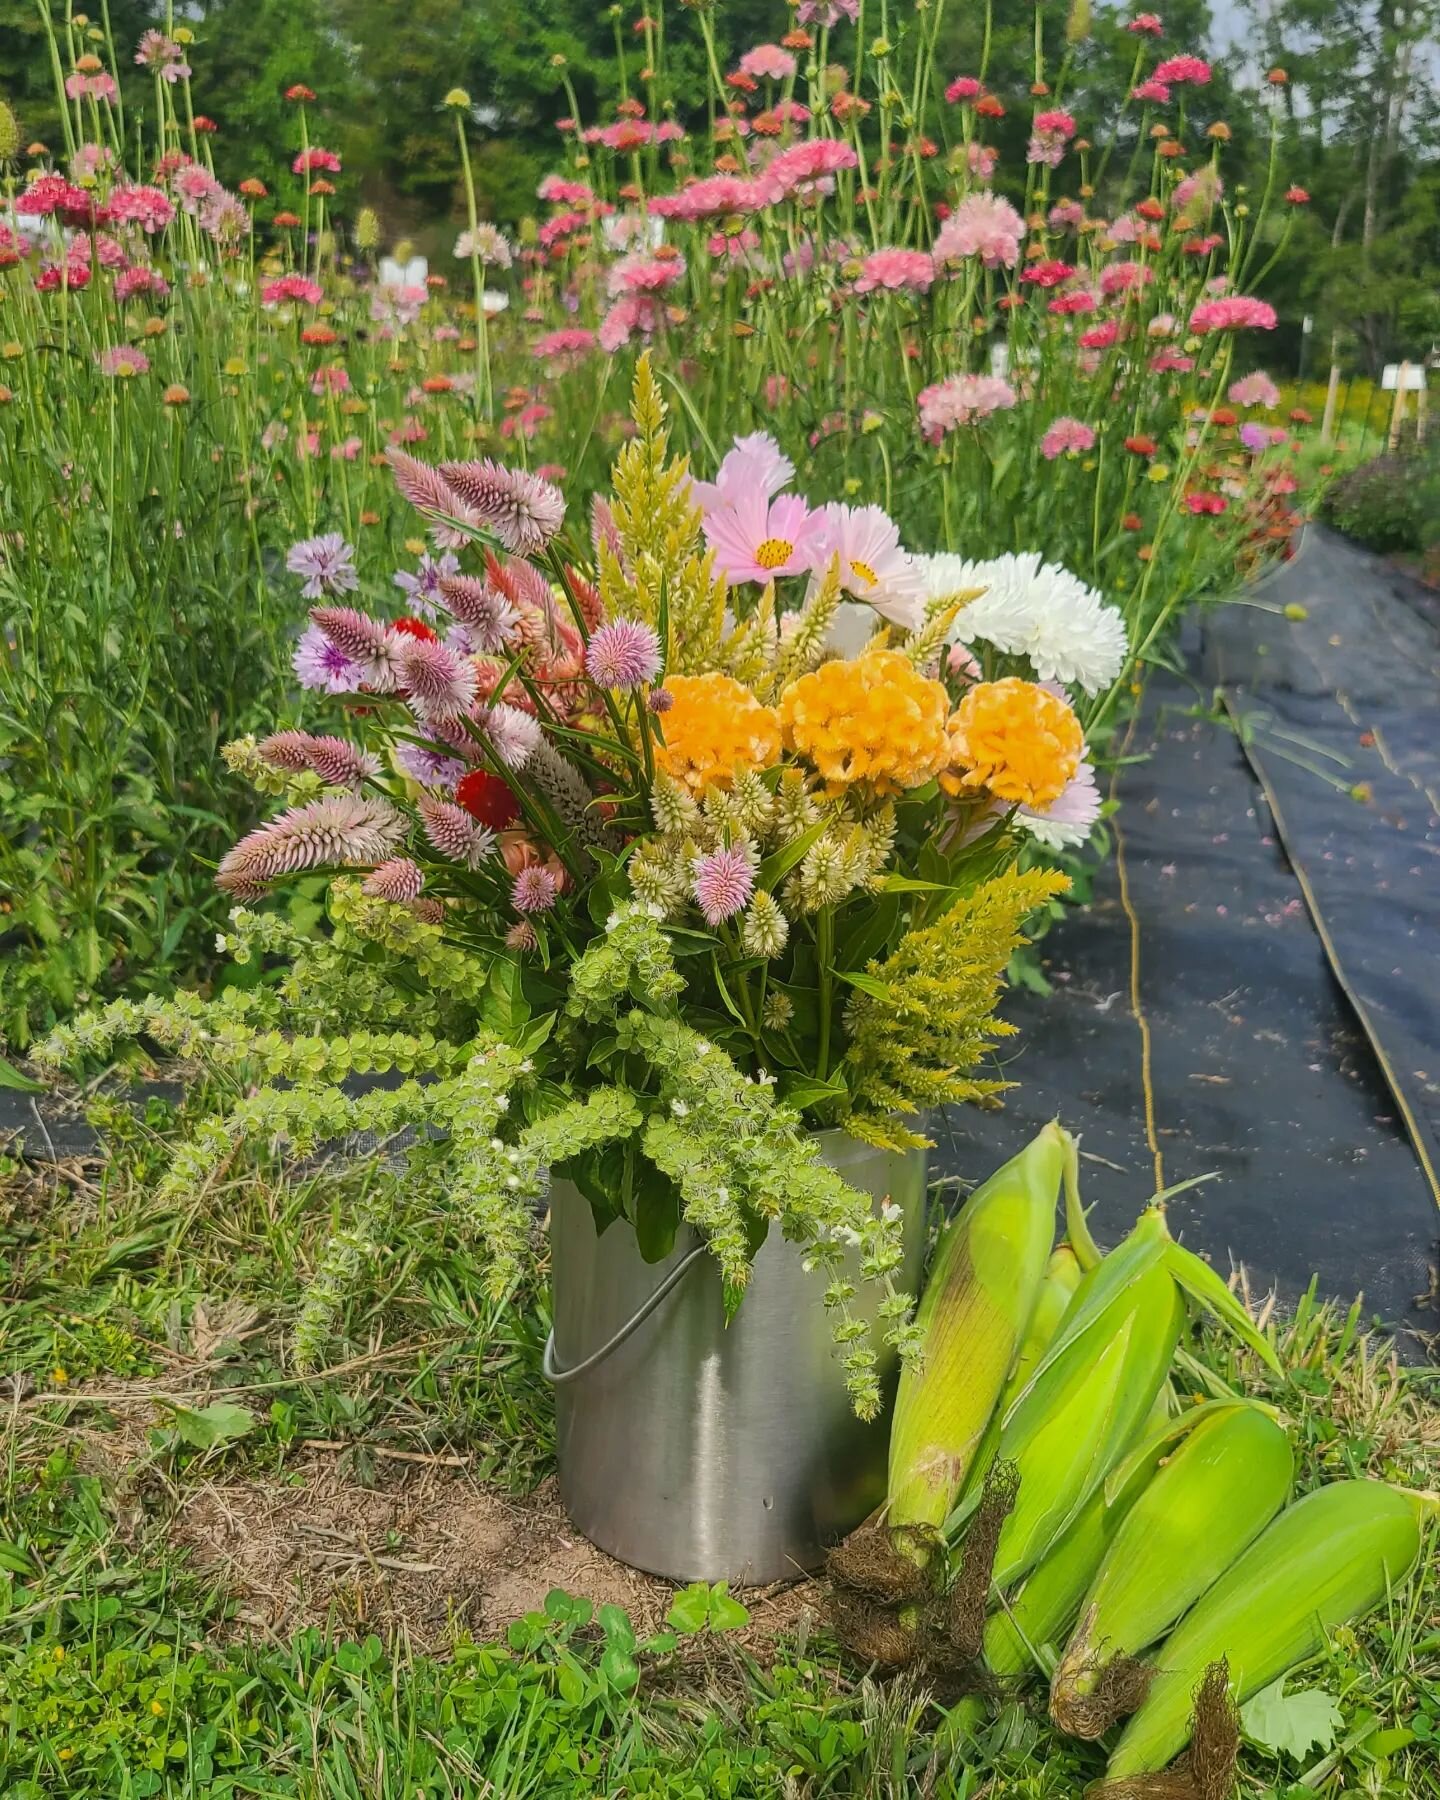 One of our volunteers, and now friend, Jodi came out on Saturday and picked this spectacular bucket of flowers and Evan through in some of our very own sweet corn. 

It's so amazing to see what people decide to create. Everything from moody colors, t